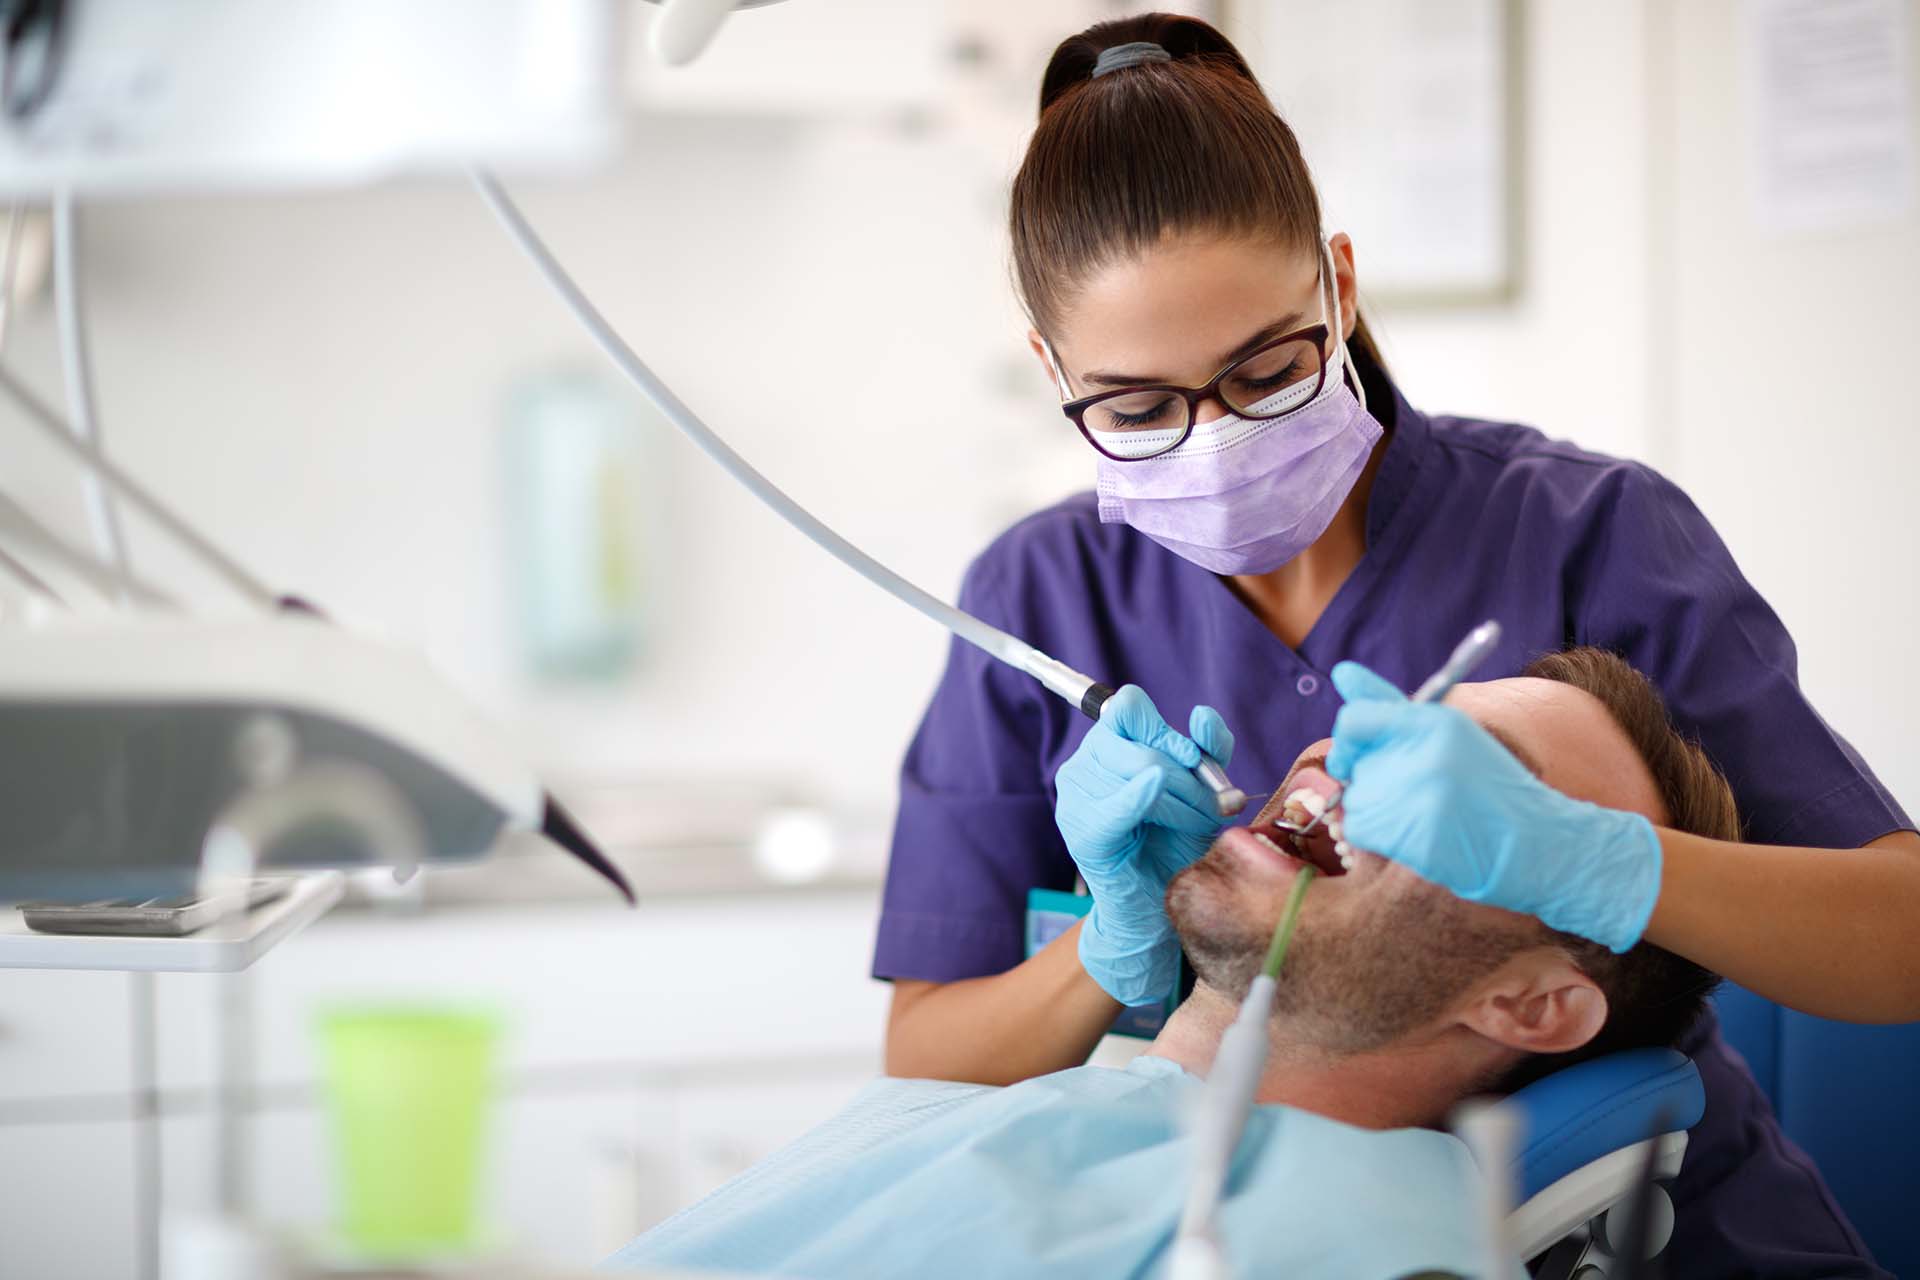 A woman dentist working on a patient